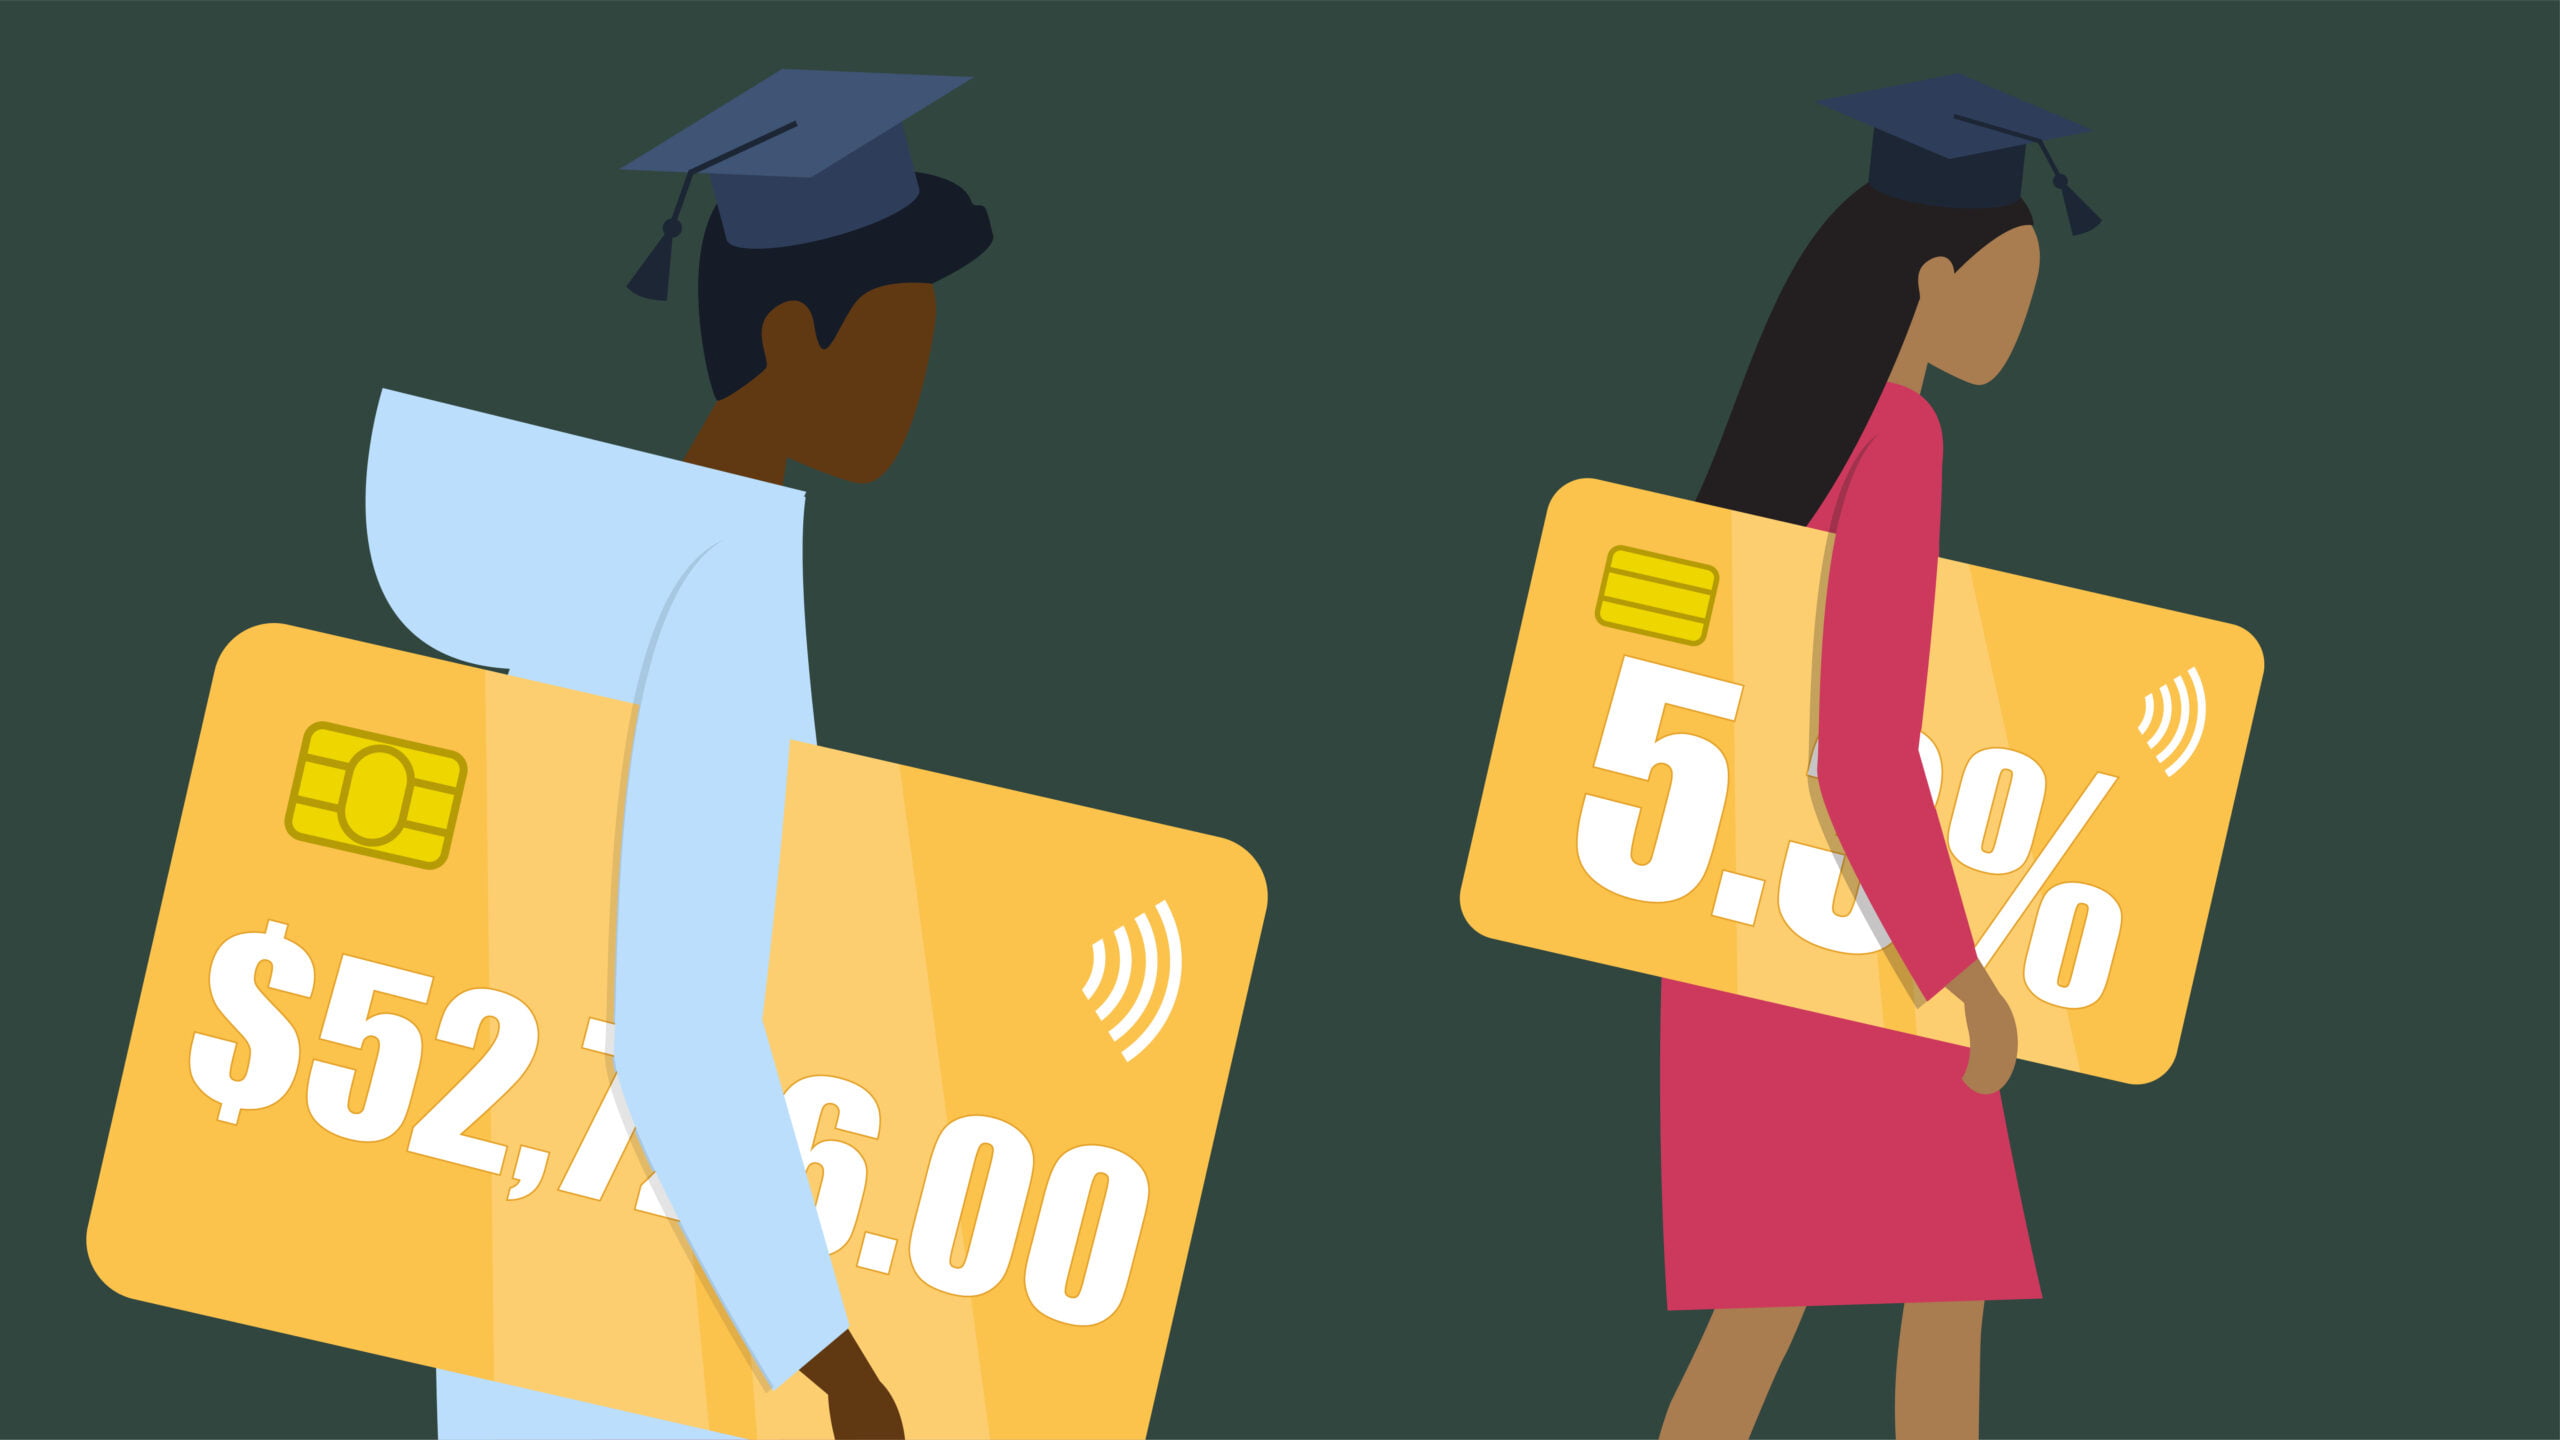 Sallie Mae Student Loans: What You Need to Know